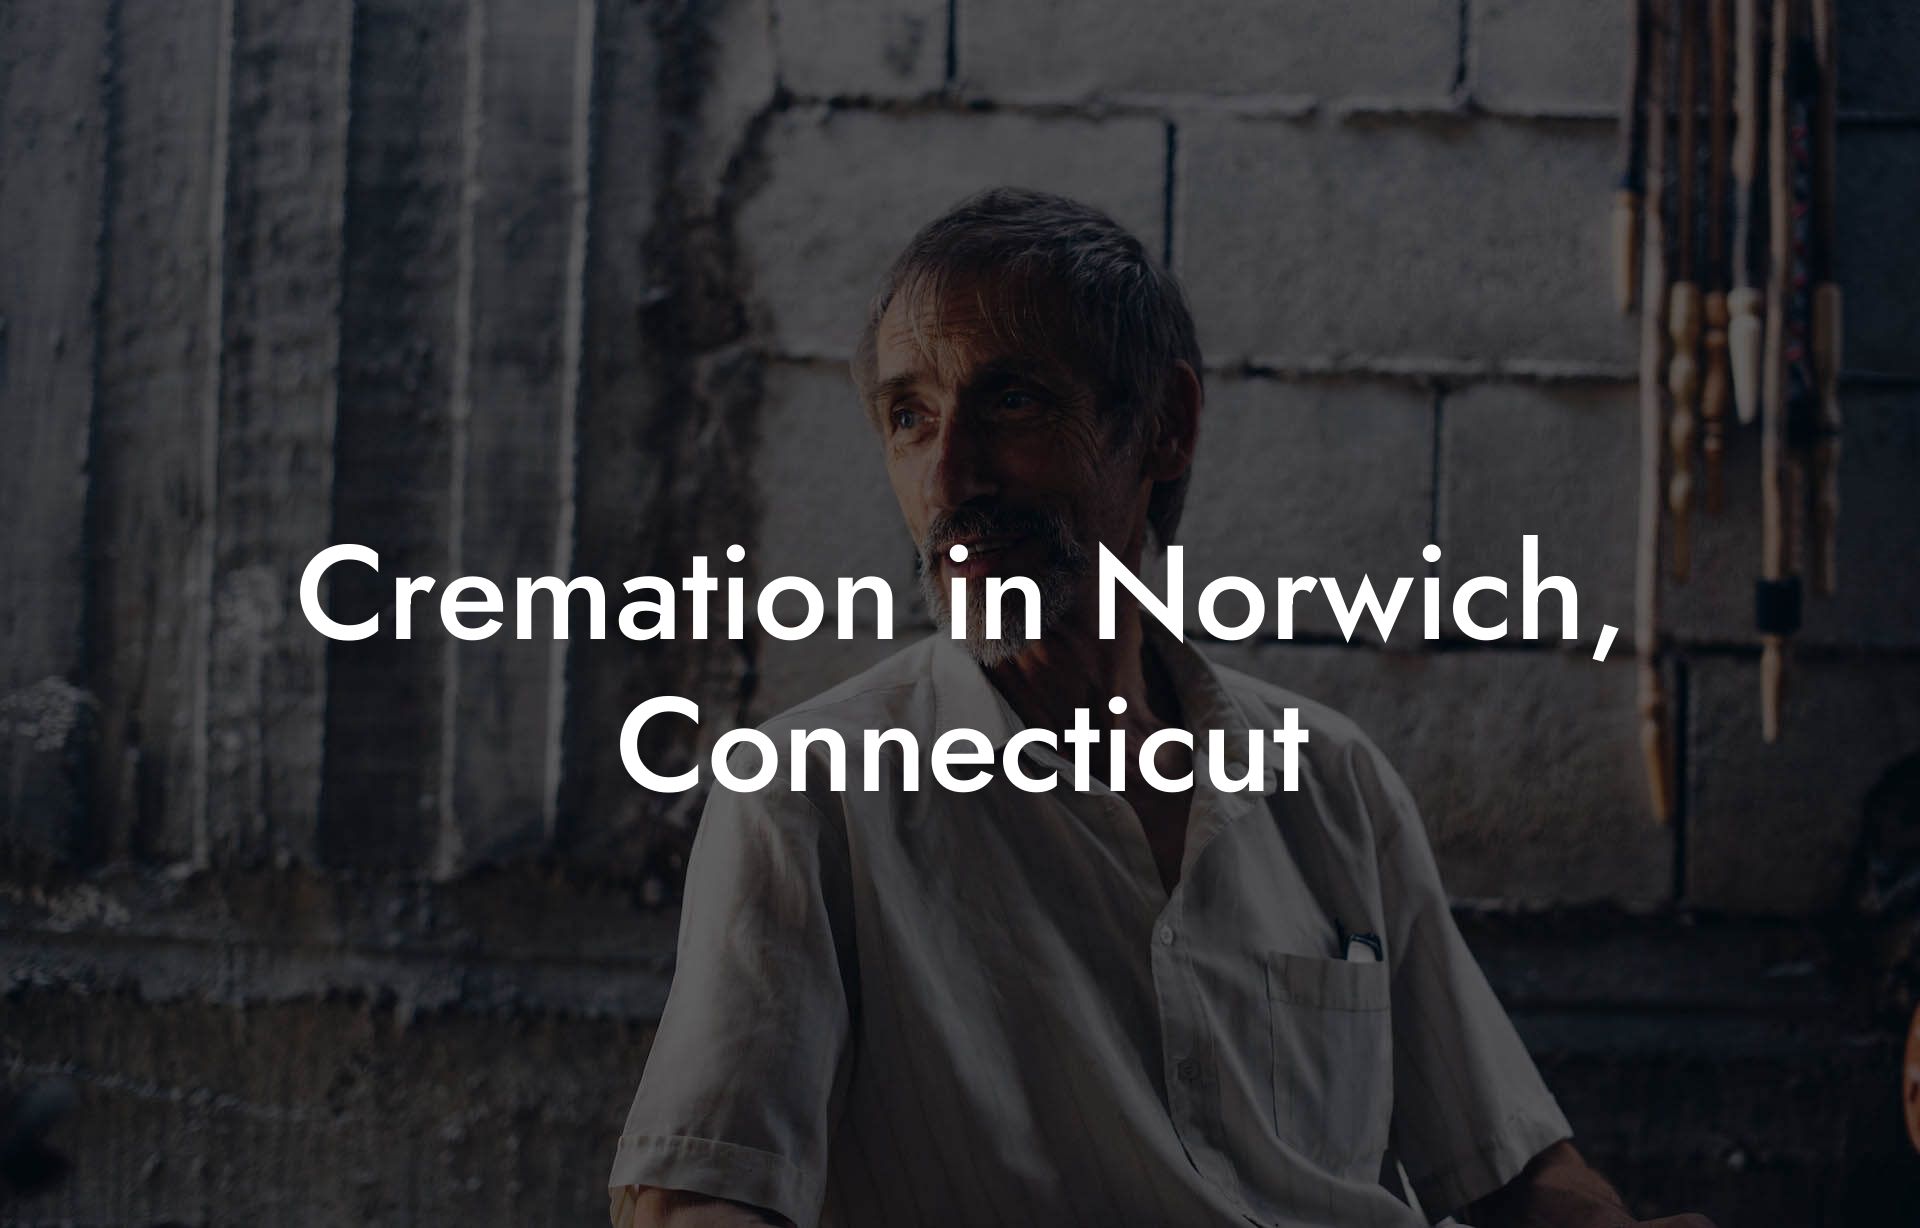 Cremation in Norwich, Connecticut